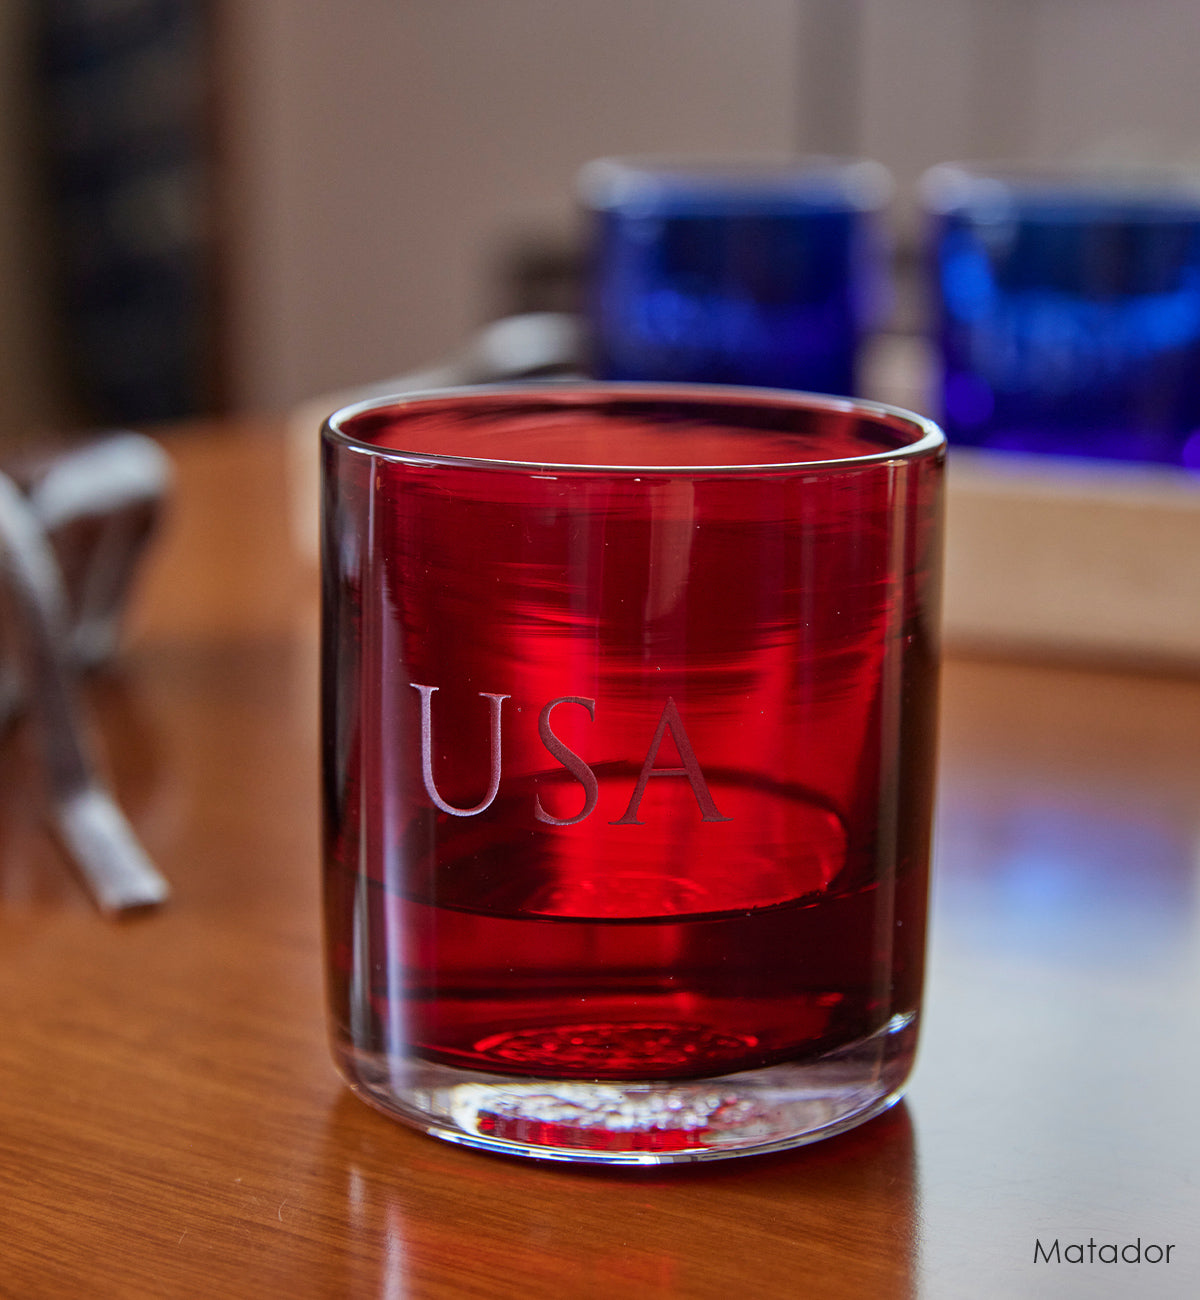 Matador rocker. dark red hand-blown glass lowball drinking glasses. with the word 'USA' custom etched, on wood table with two blue rockers in background.